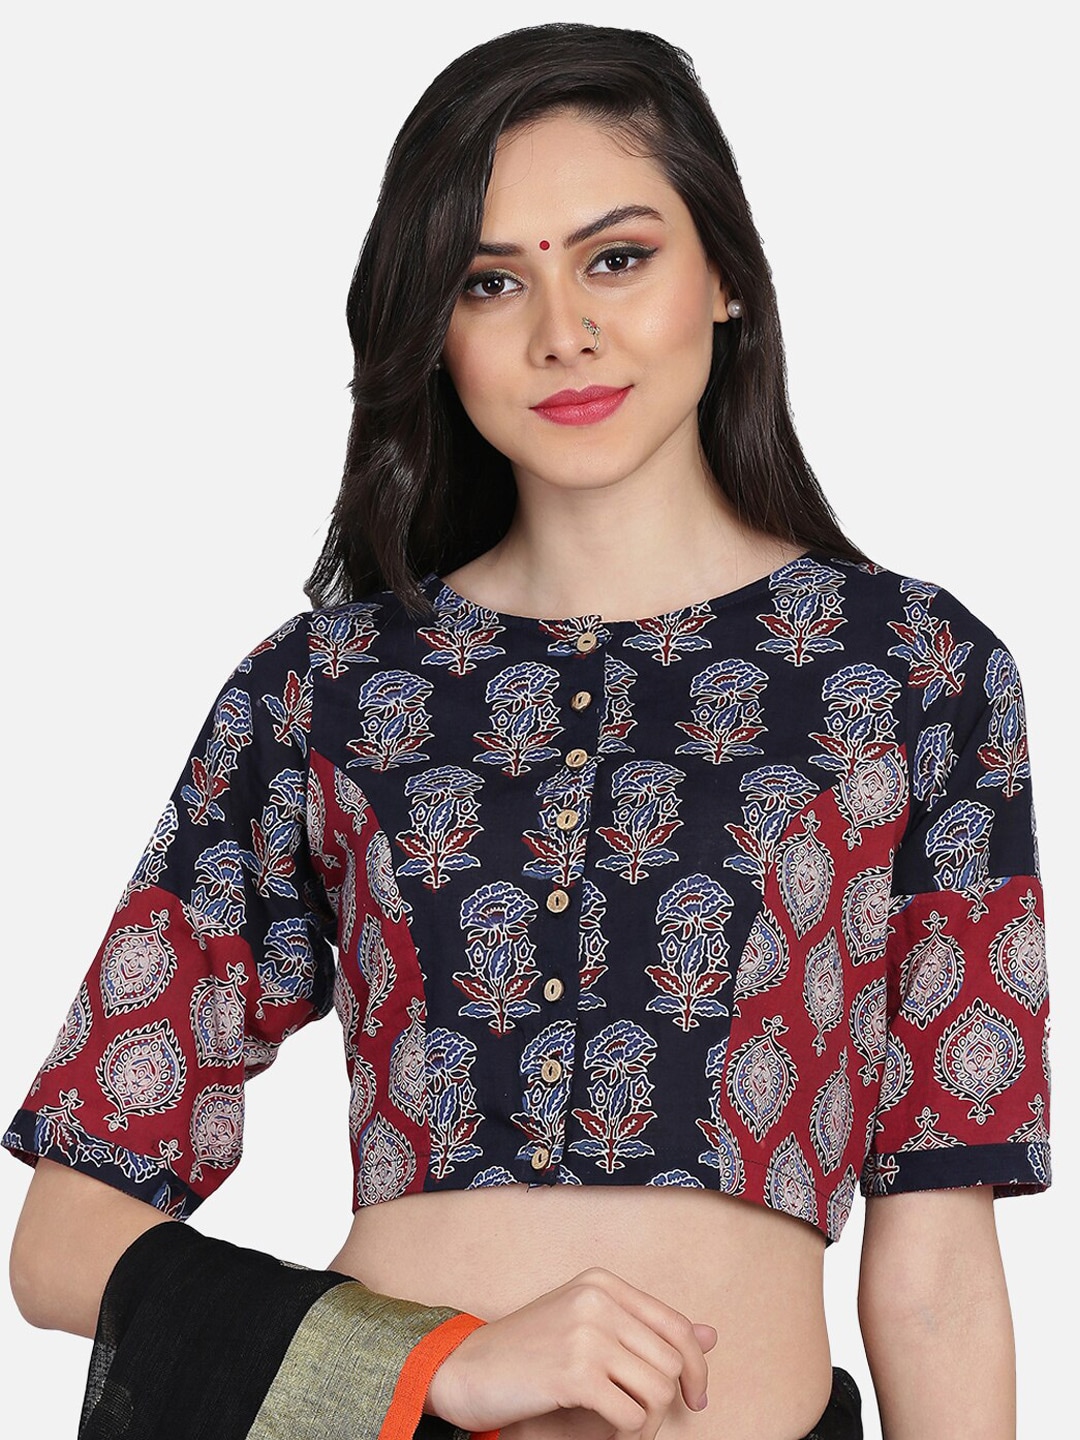 THE WEAVE TRAVELLER Black & Red Printed Non Padded Ready-Made Saree Blouse Price in India